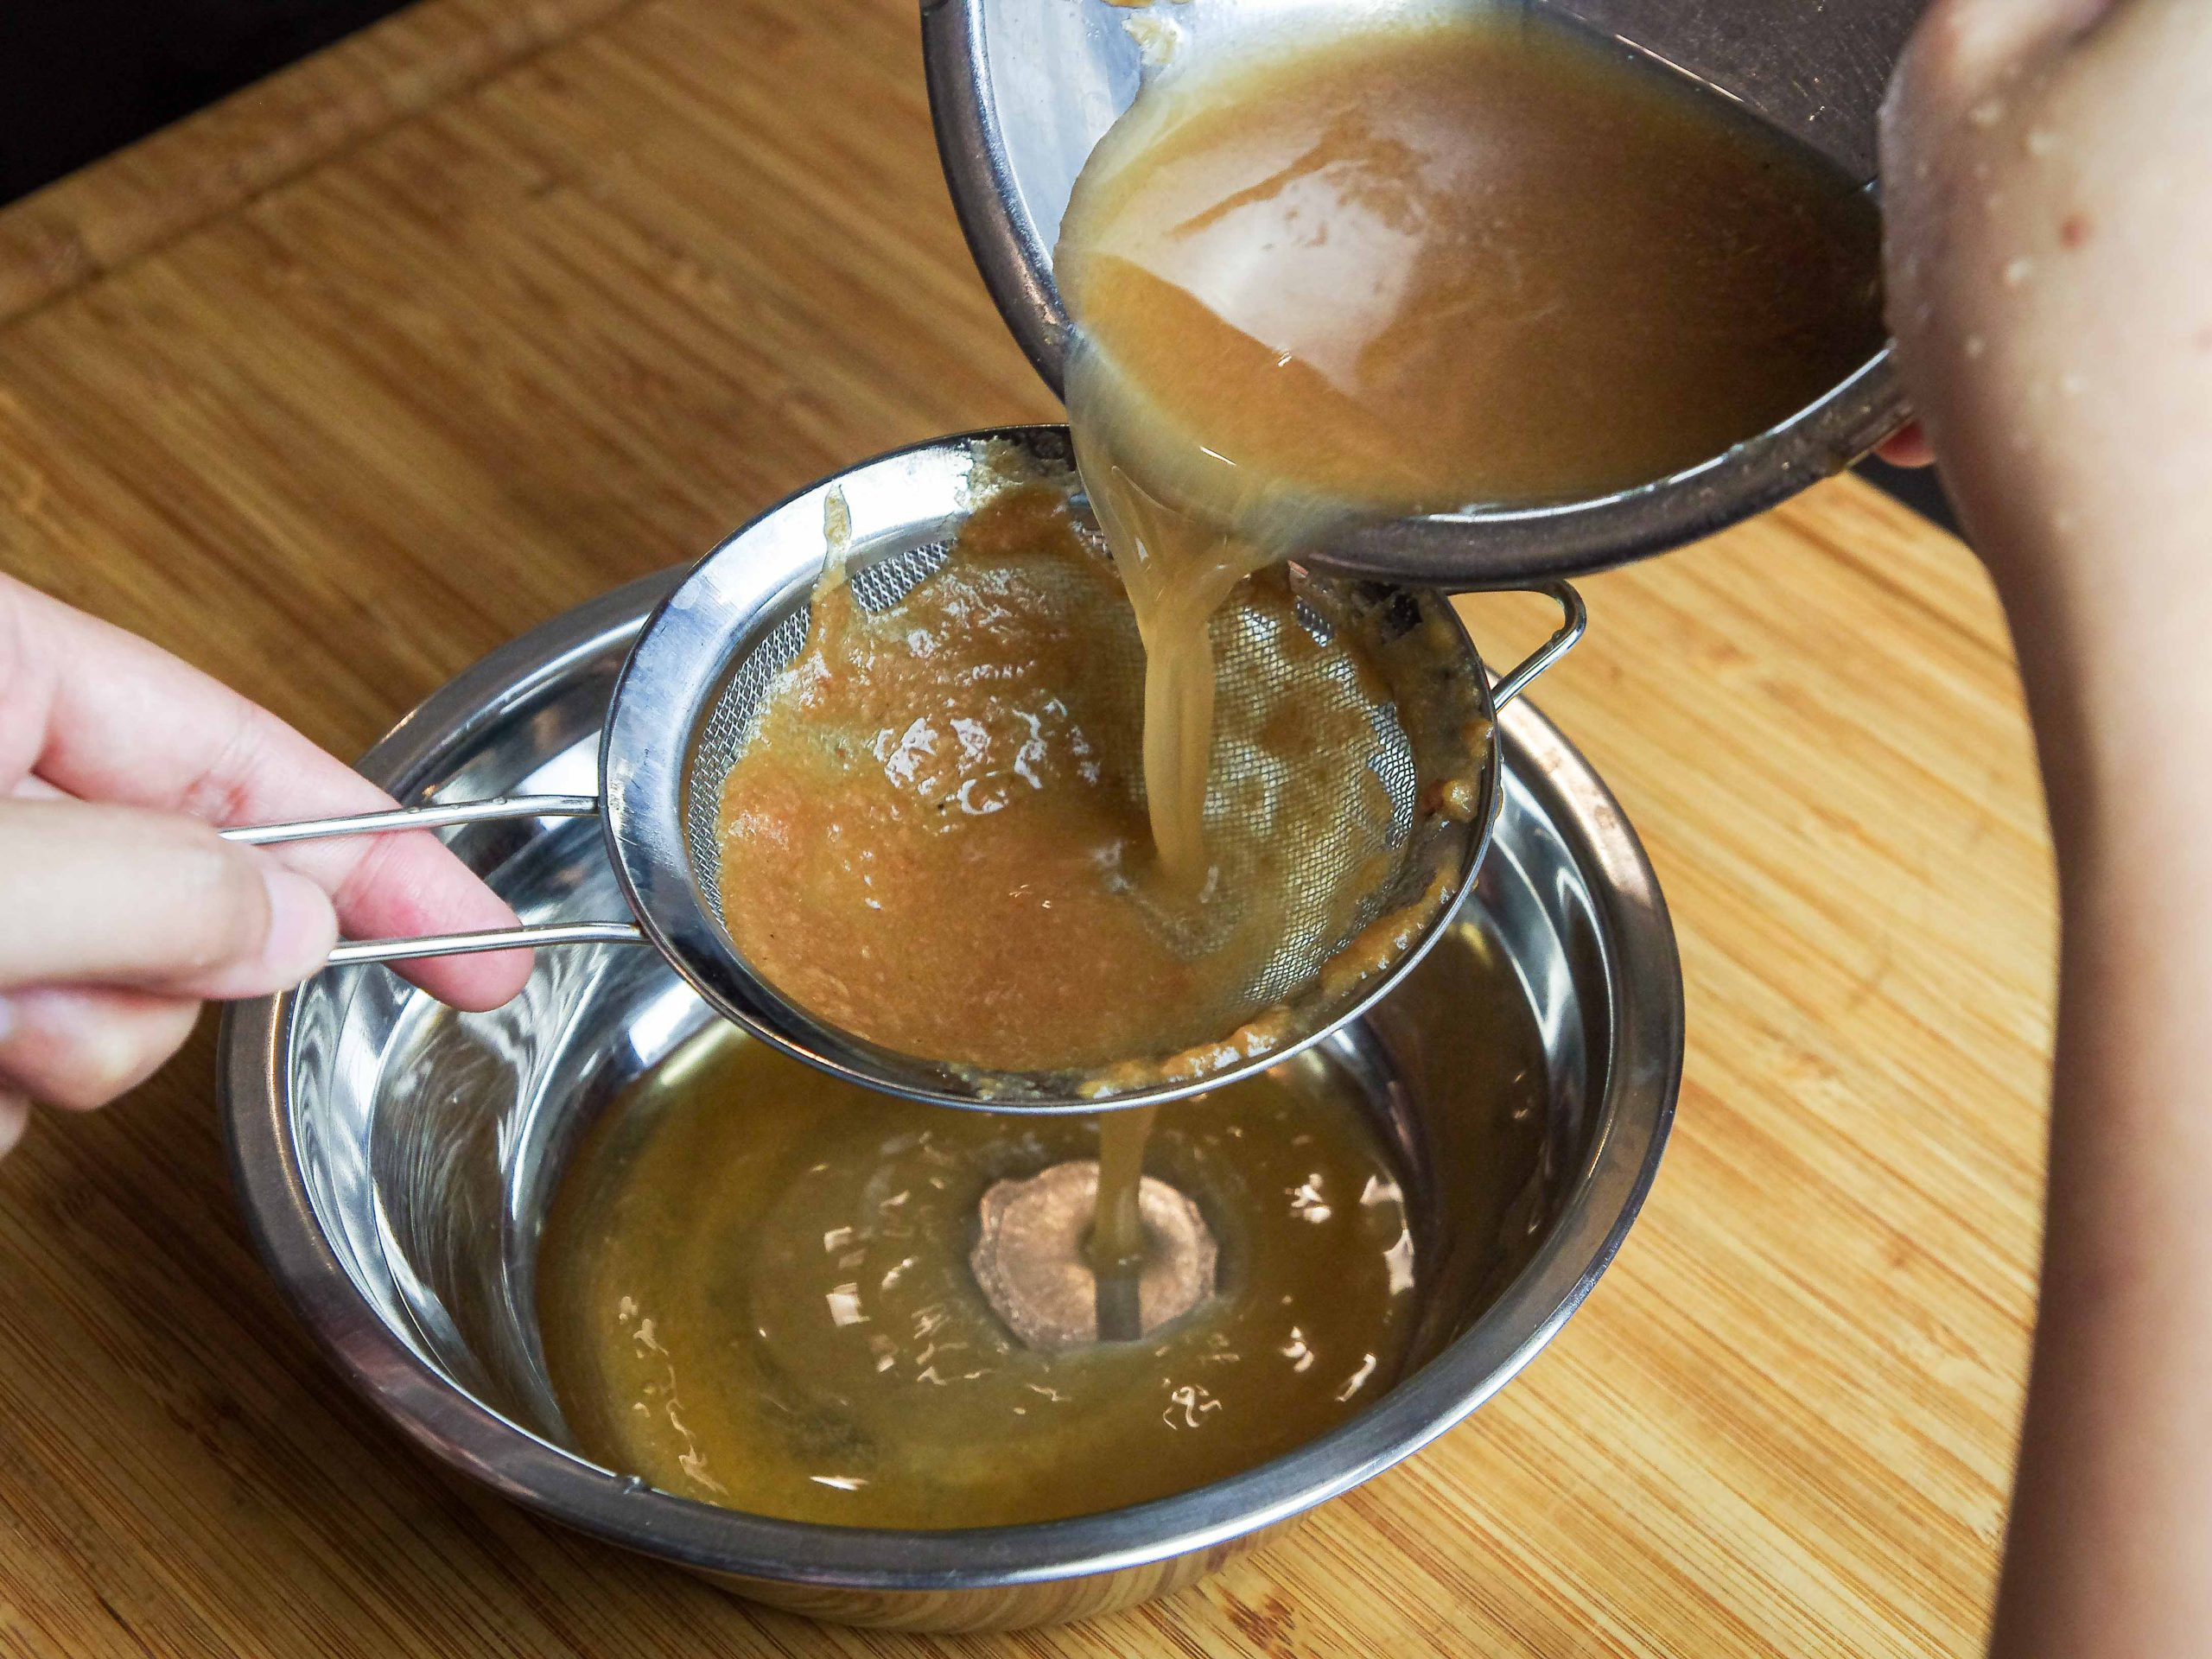 Asam jawa juice being poured into a separate bowl through a strainer.